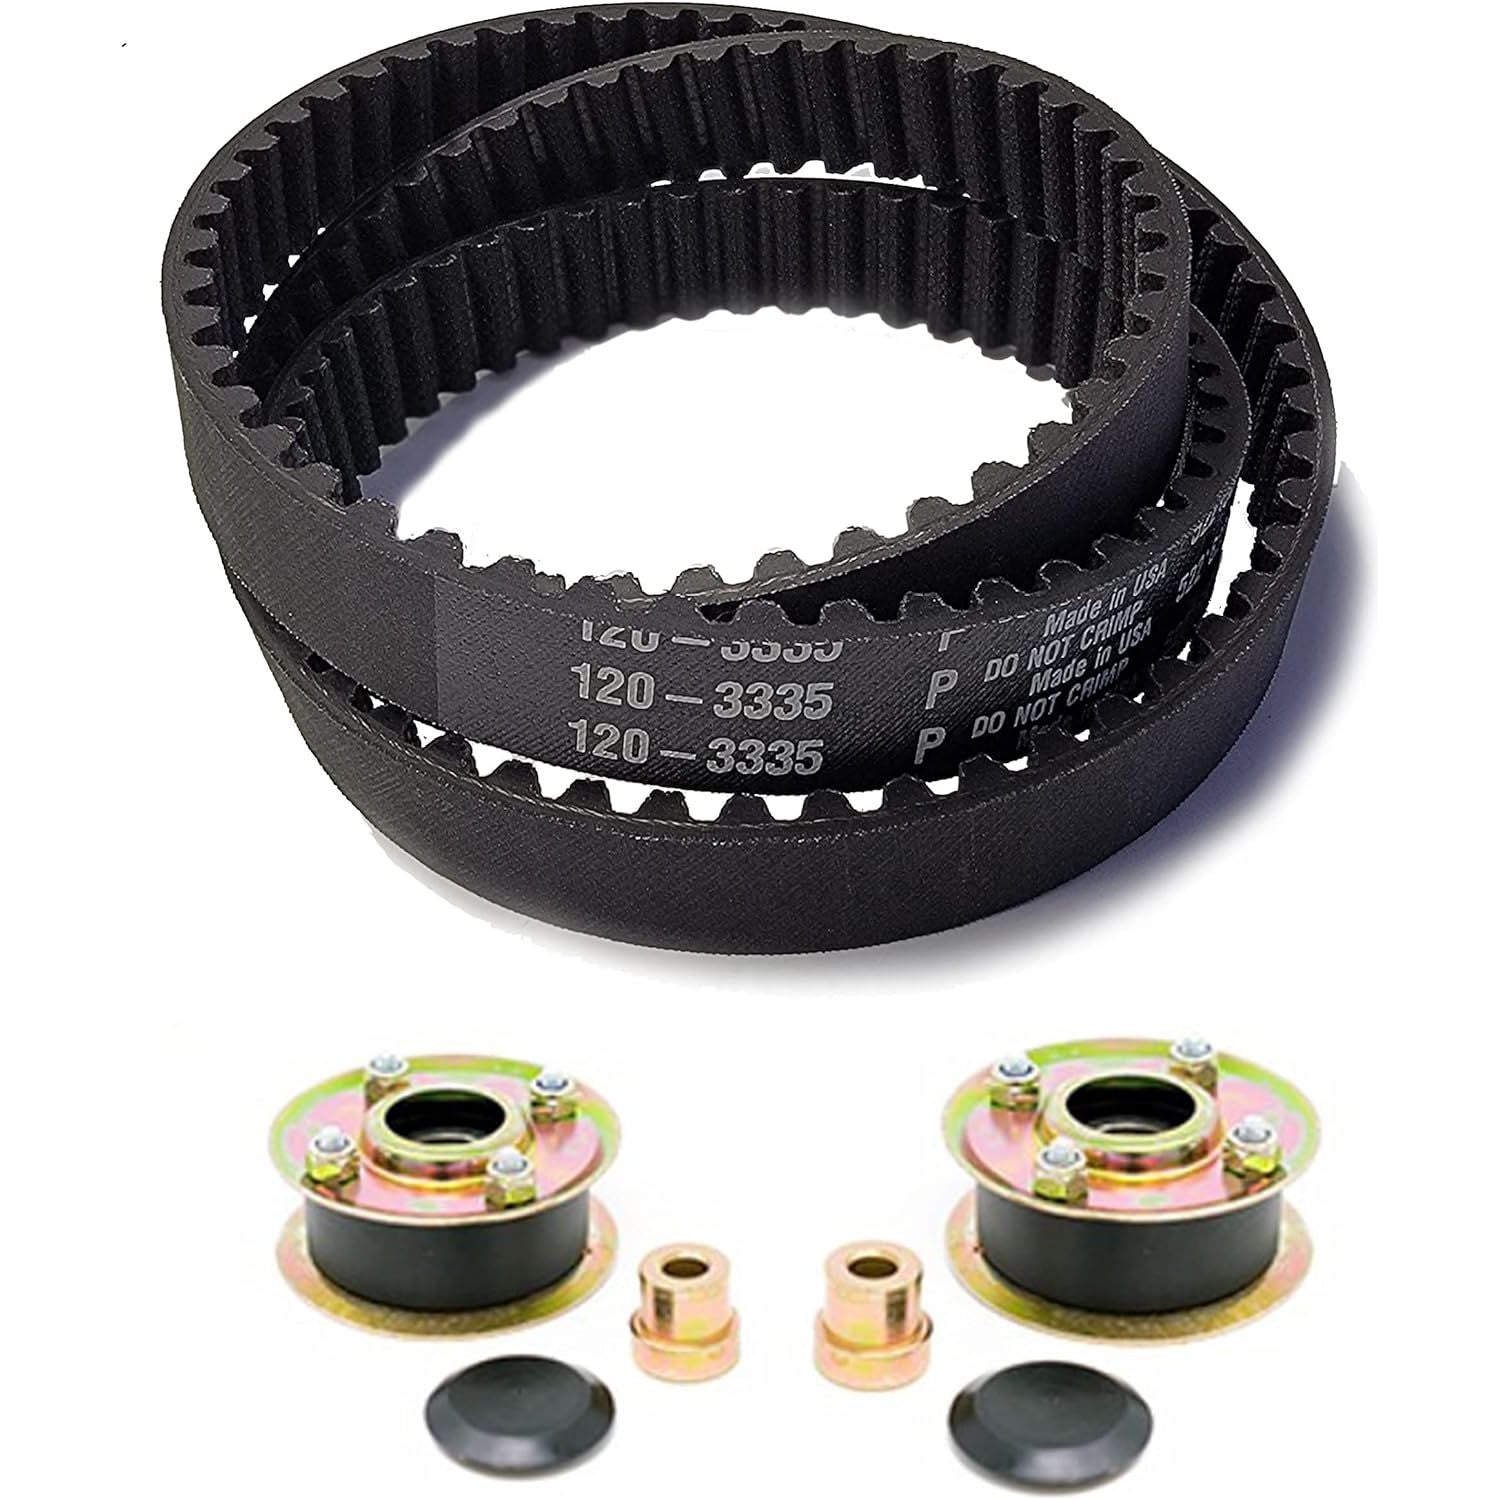 Genuine Toro Belt and Pulley Kit For Toro TimeMaster/Turfmaster and Exmark 30 Inch Commercial Lawnmowers